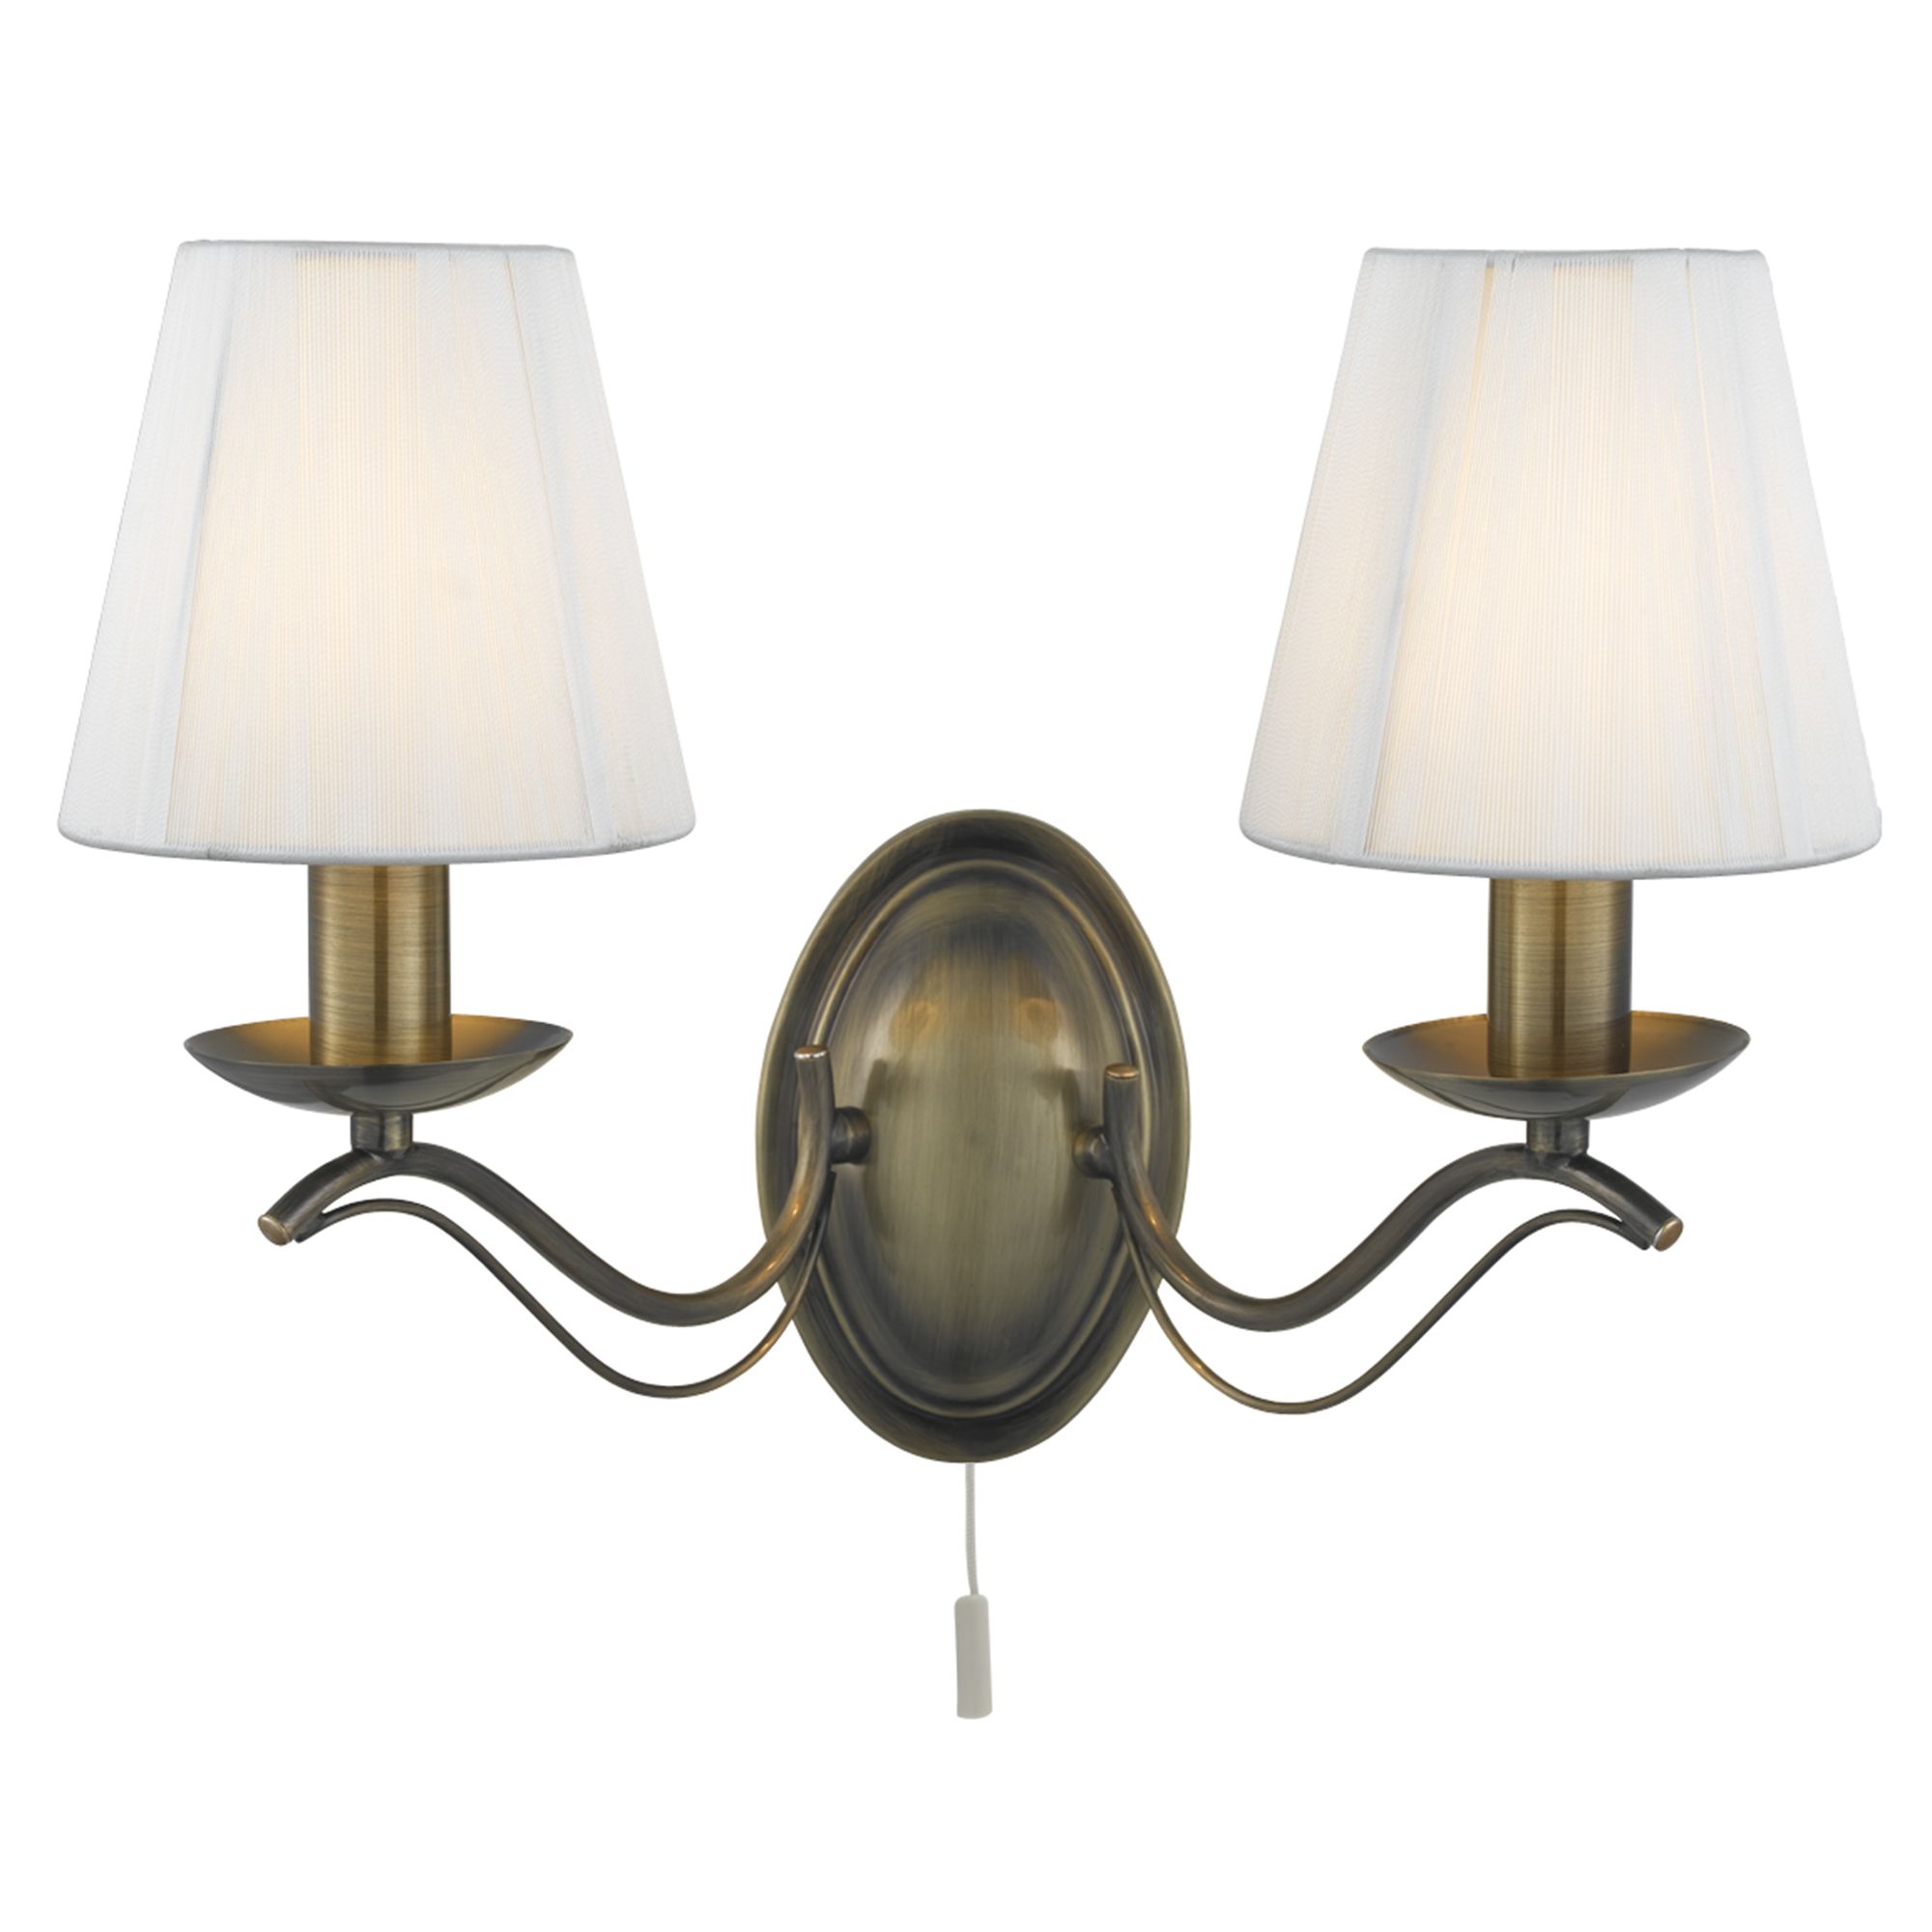 Andretti Brass 2 Light Wall Light with String Shades